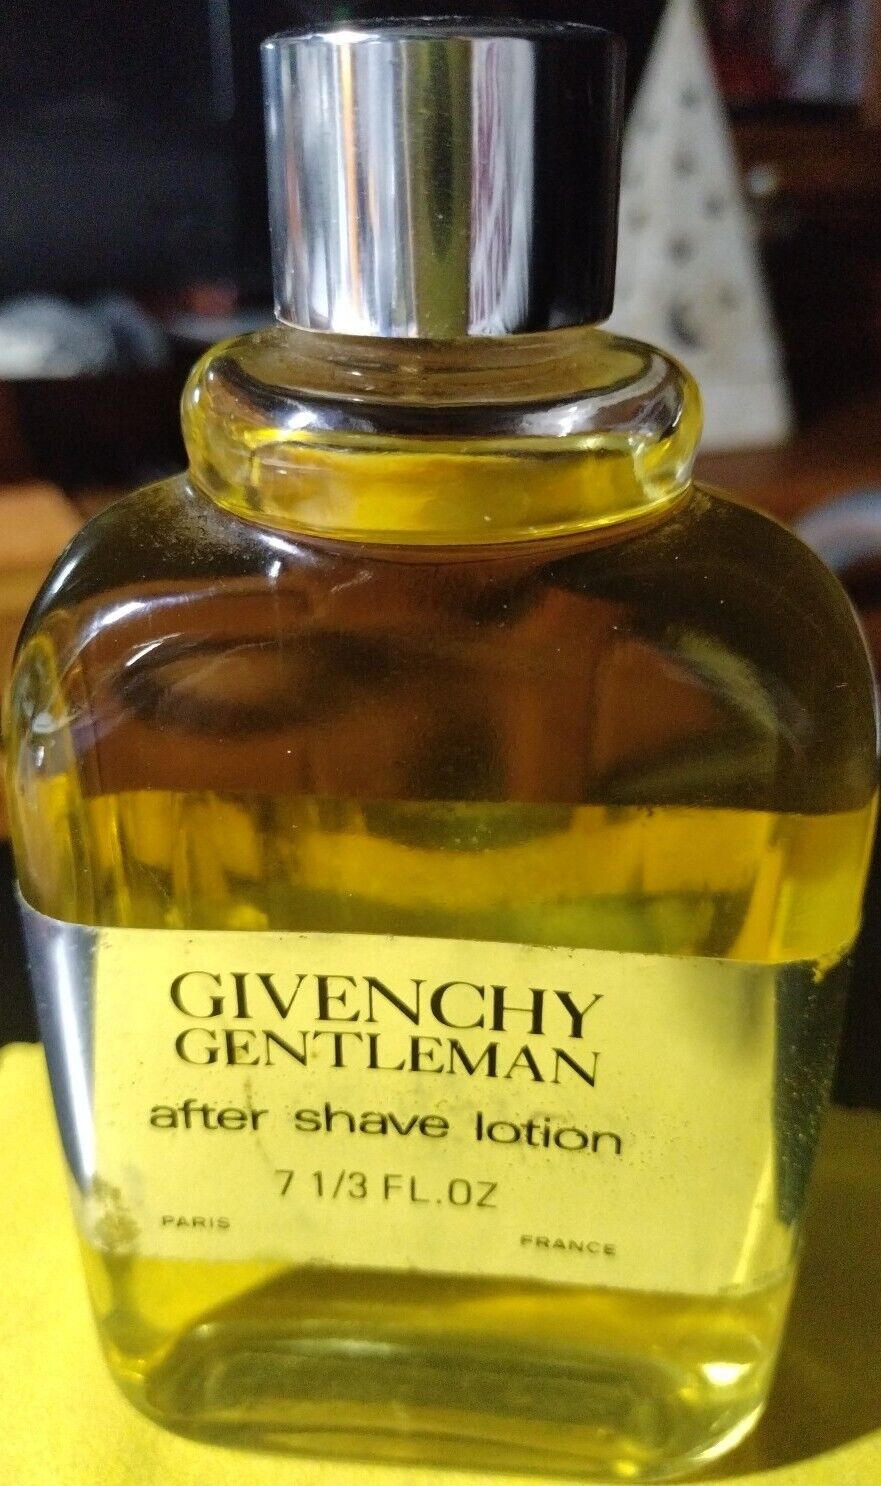 NEW GIVENCHY GENTLEMAN AFTERSHAVE LARGE 7 1/3oz/220ml*ORIGINAL 1970s*OLD STOCK*